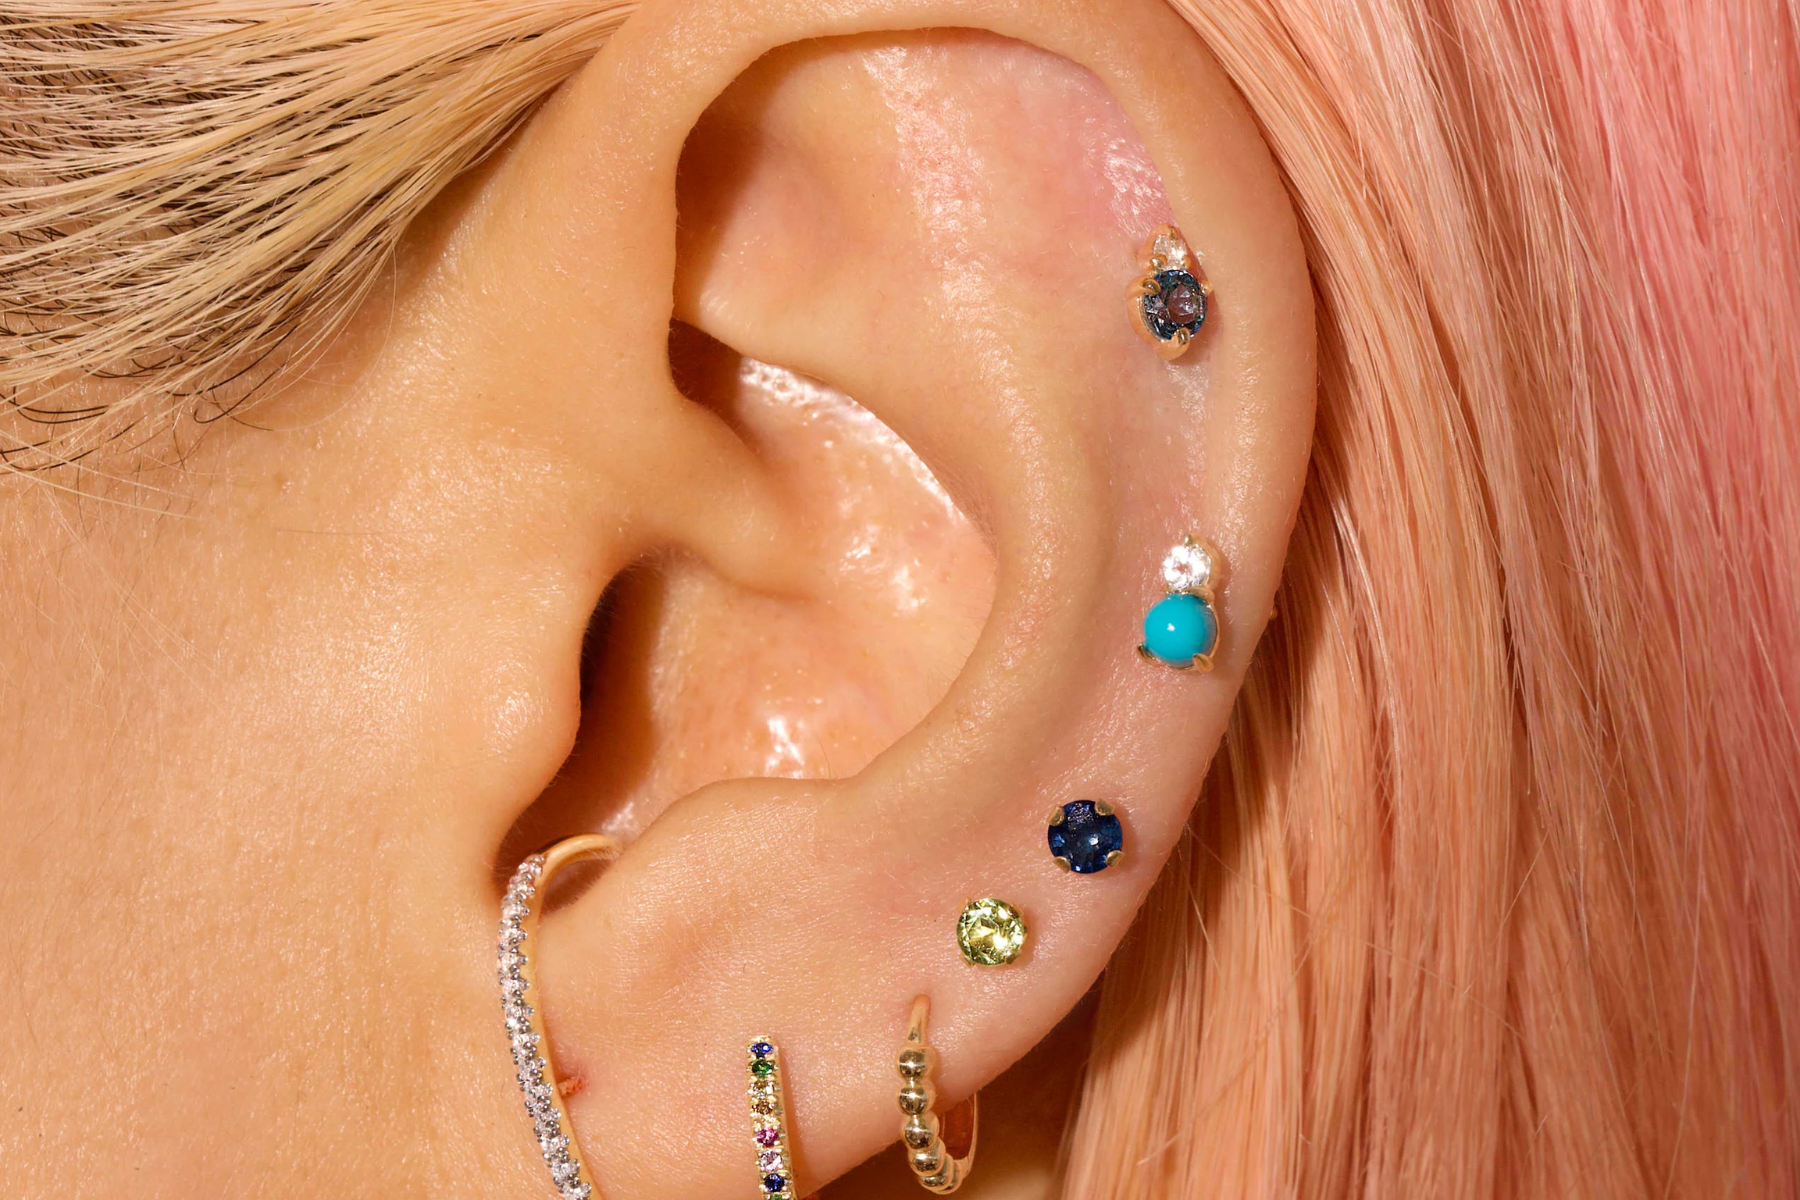 Different varieties of birthstone earrings adorn the ear of a woman